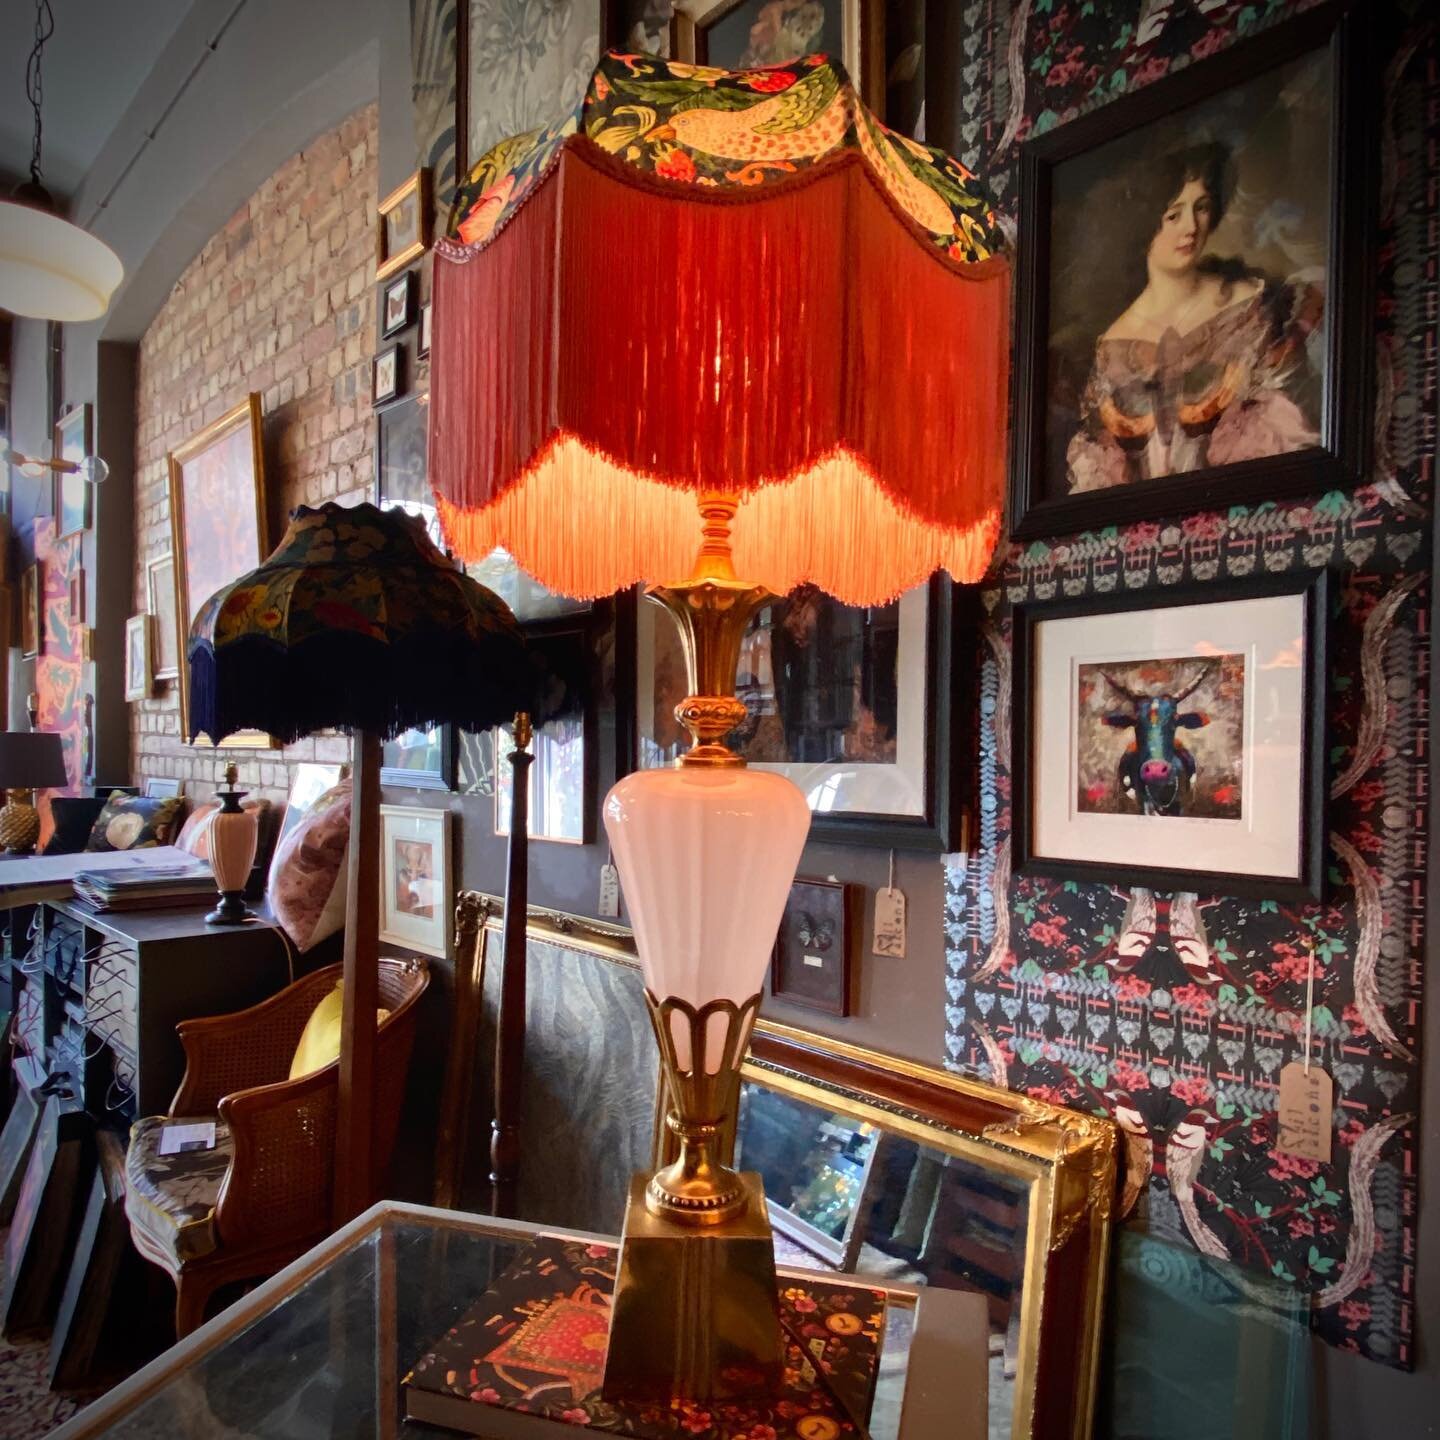 New in today!
Standing at over 2 foot tall this pair of brass 1920s rose glass lamps have been rewired and refurbed. Shown here with lampshade in Strawberry Thief by William Morris. Stunning!!
#antiquelighting #antiquelamp #lamp #lampshade #ilfalcone